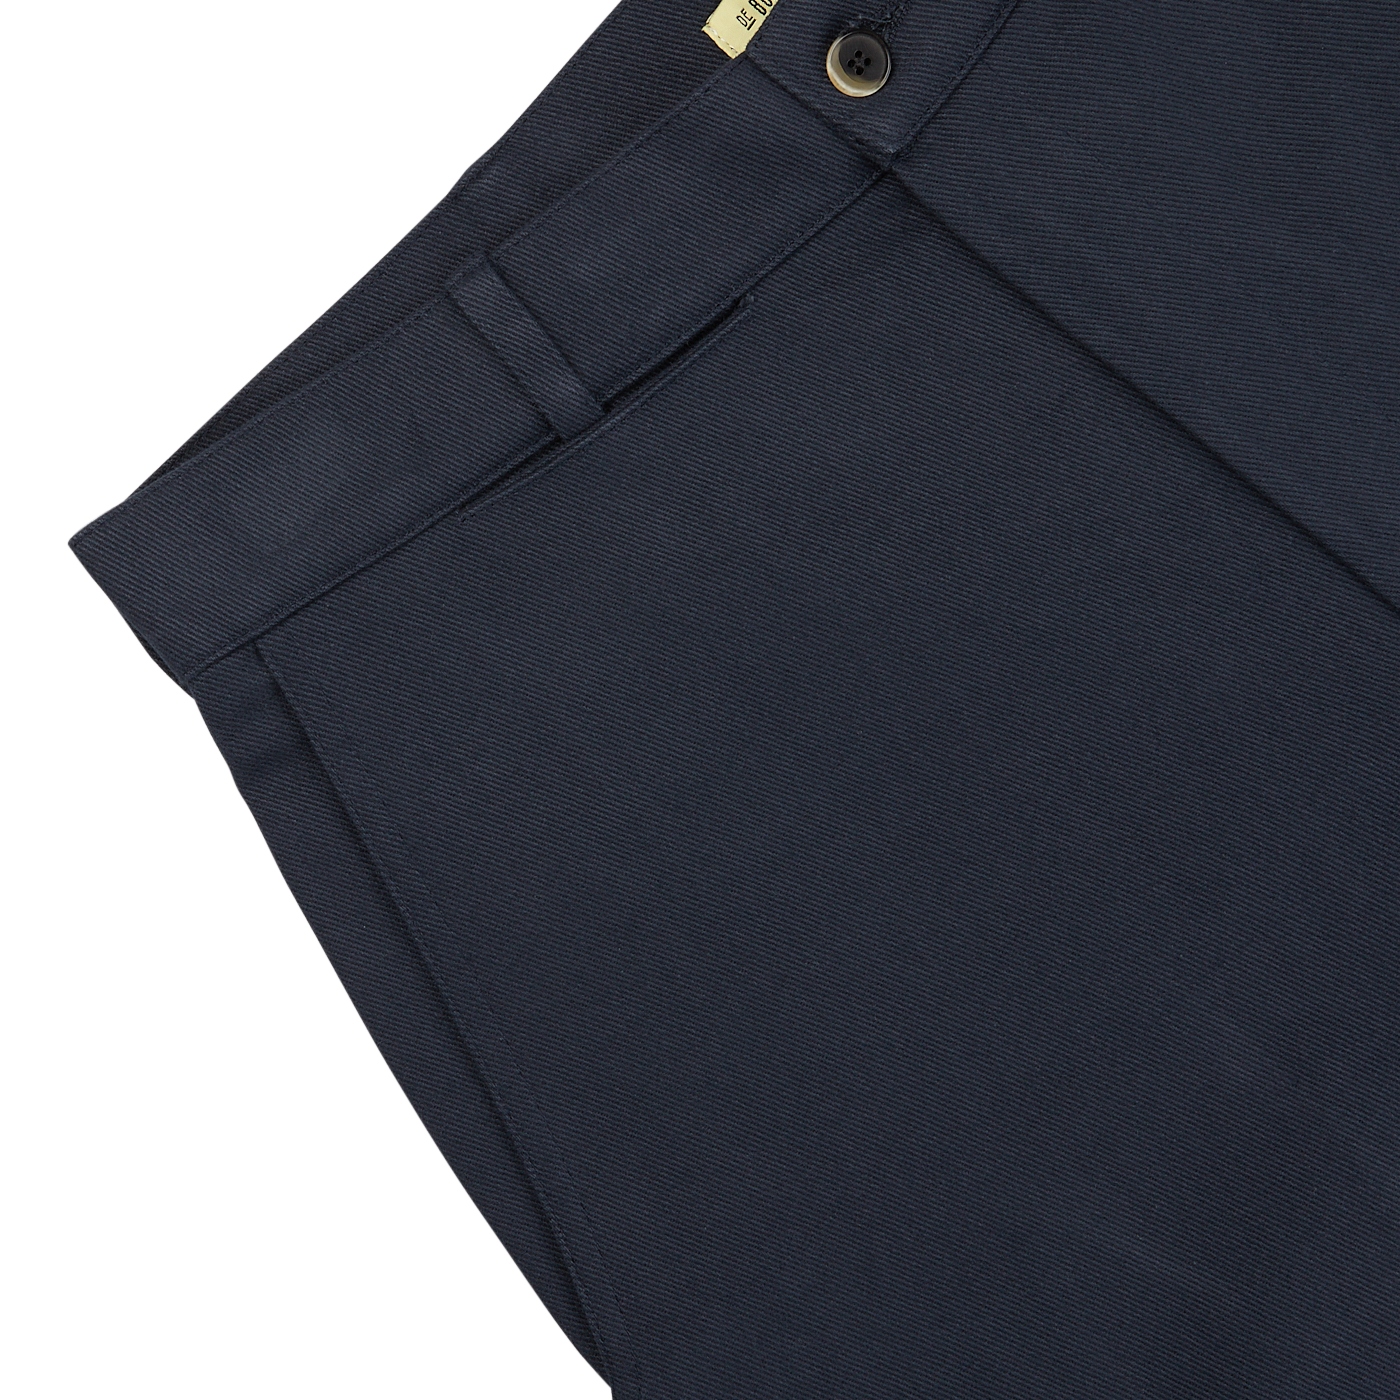 Close-up of De Bonne Facture navy blue heavy cotton drill balloon trousers, showing detailed texture and a button closure in heavy cotton drill fabric.